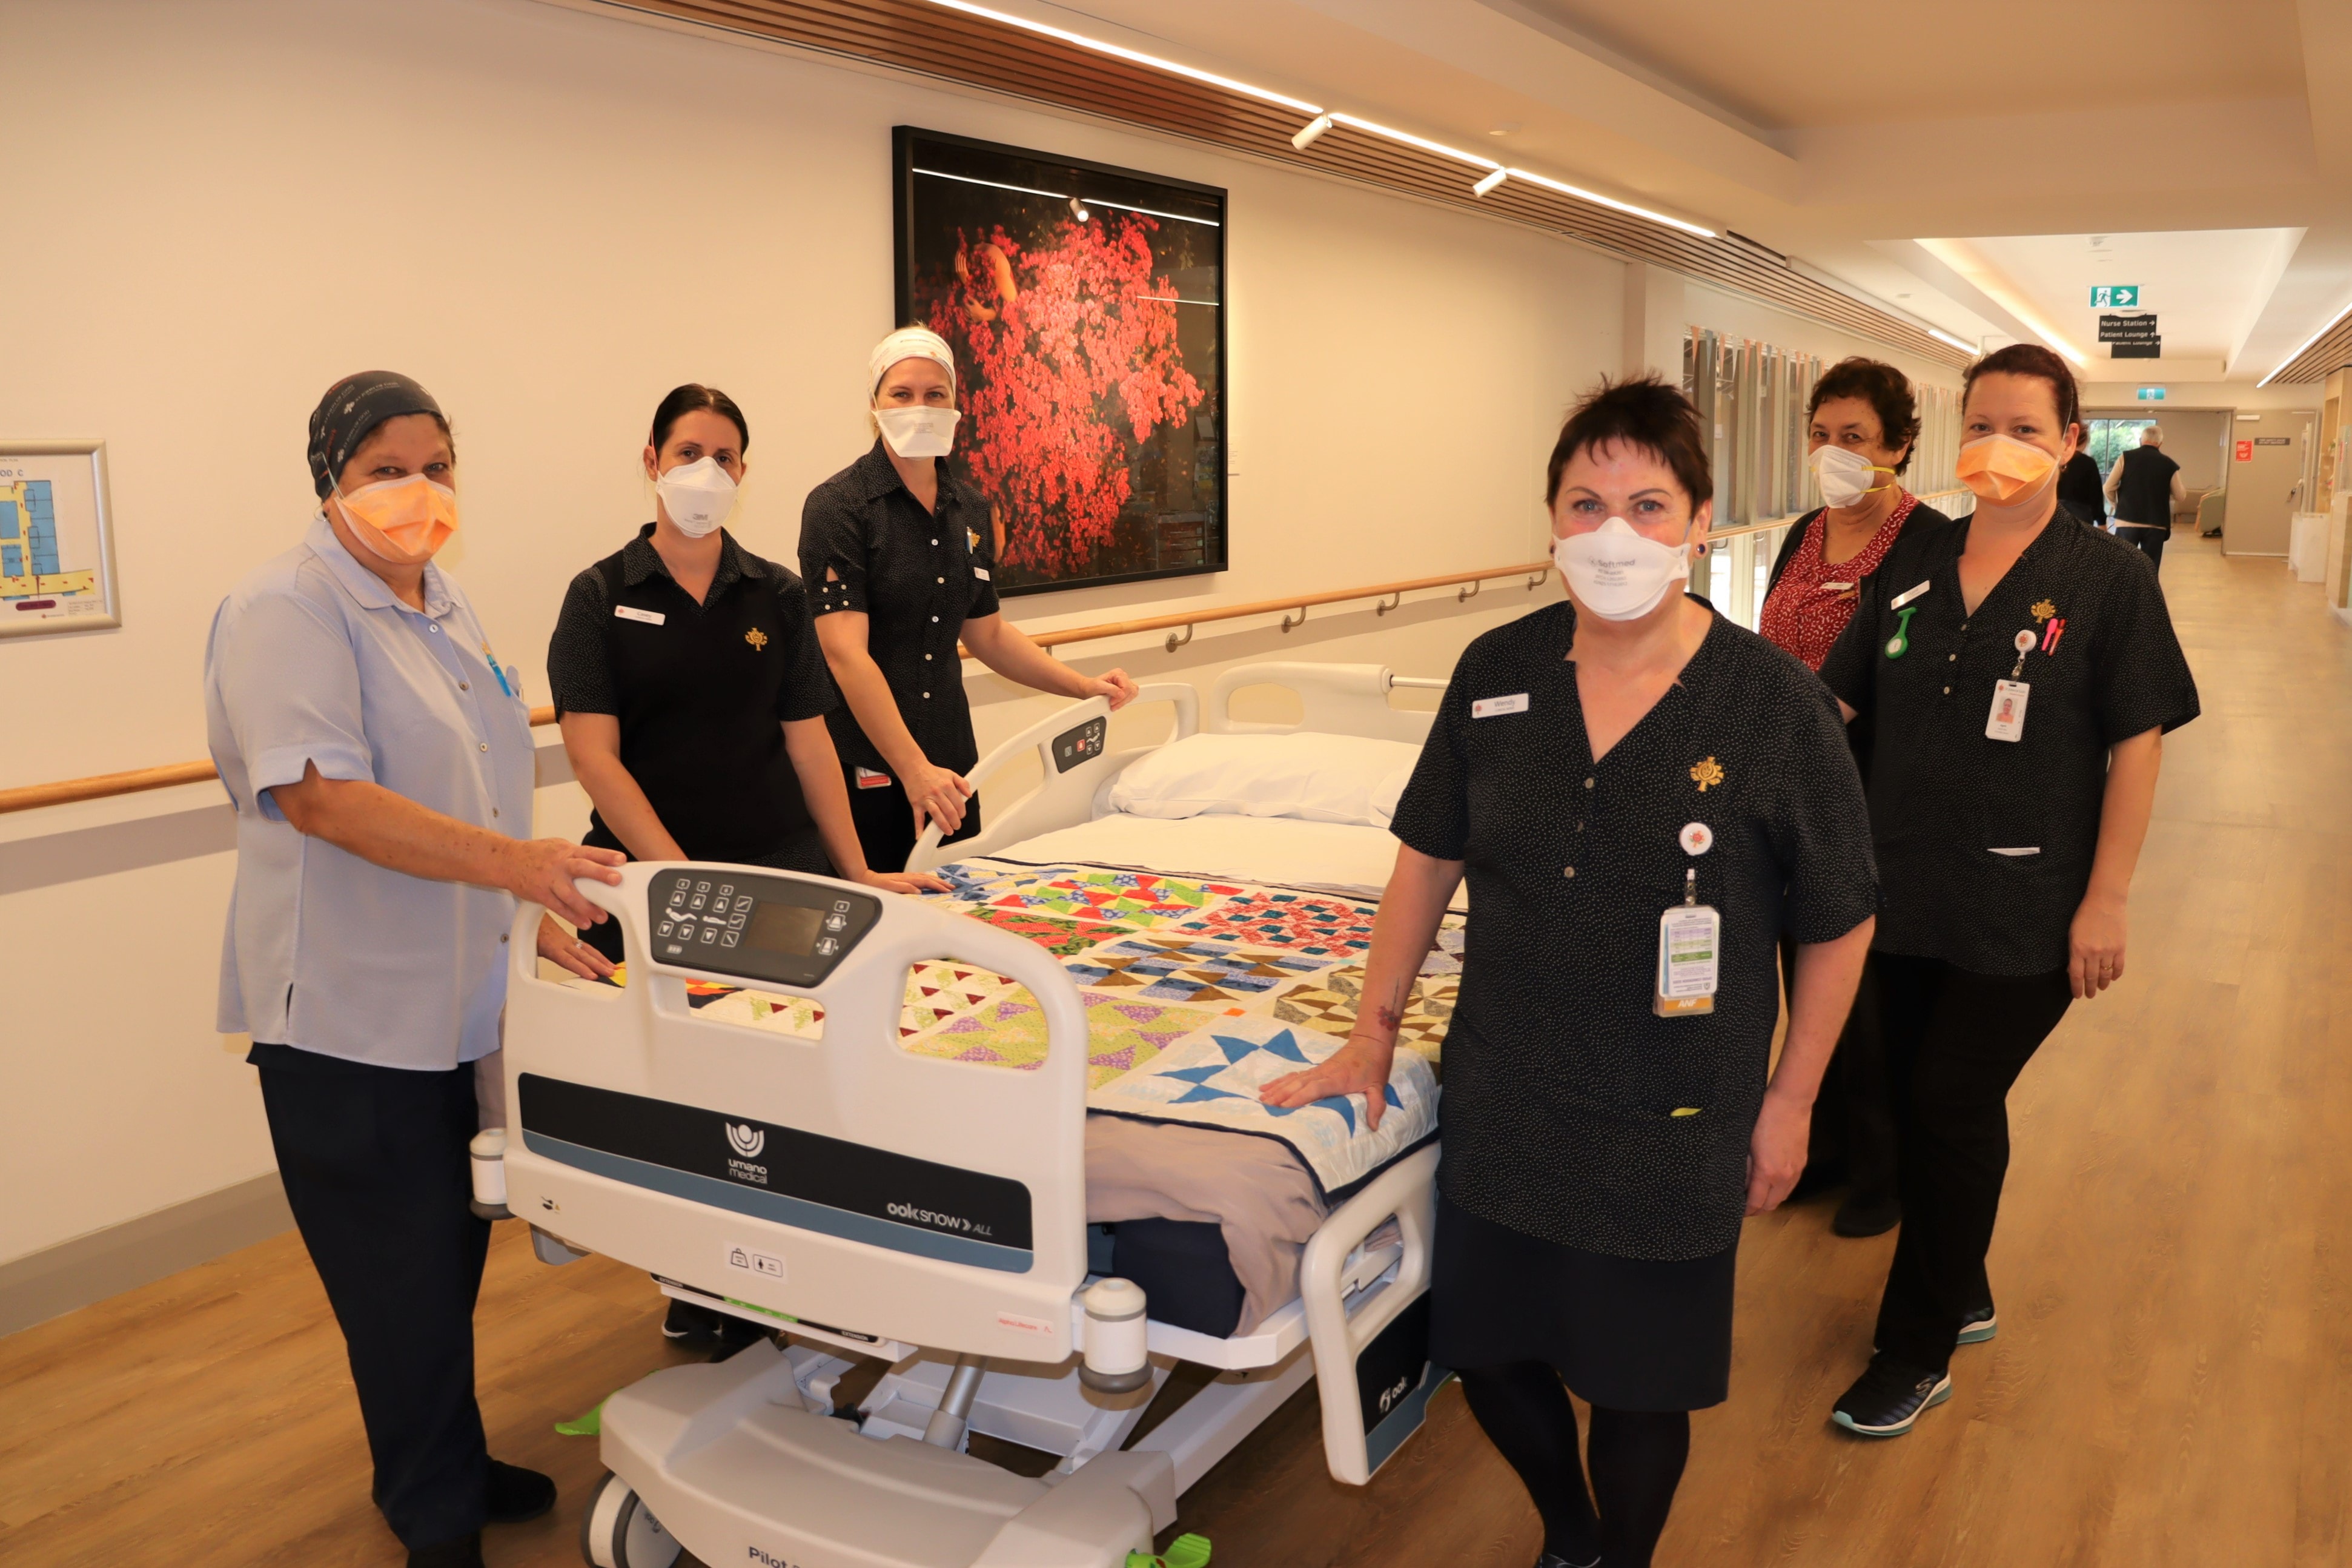 St John of God Murdoch Hospital caregivers standing next to a Cuddle Bed